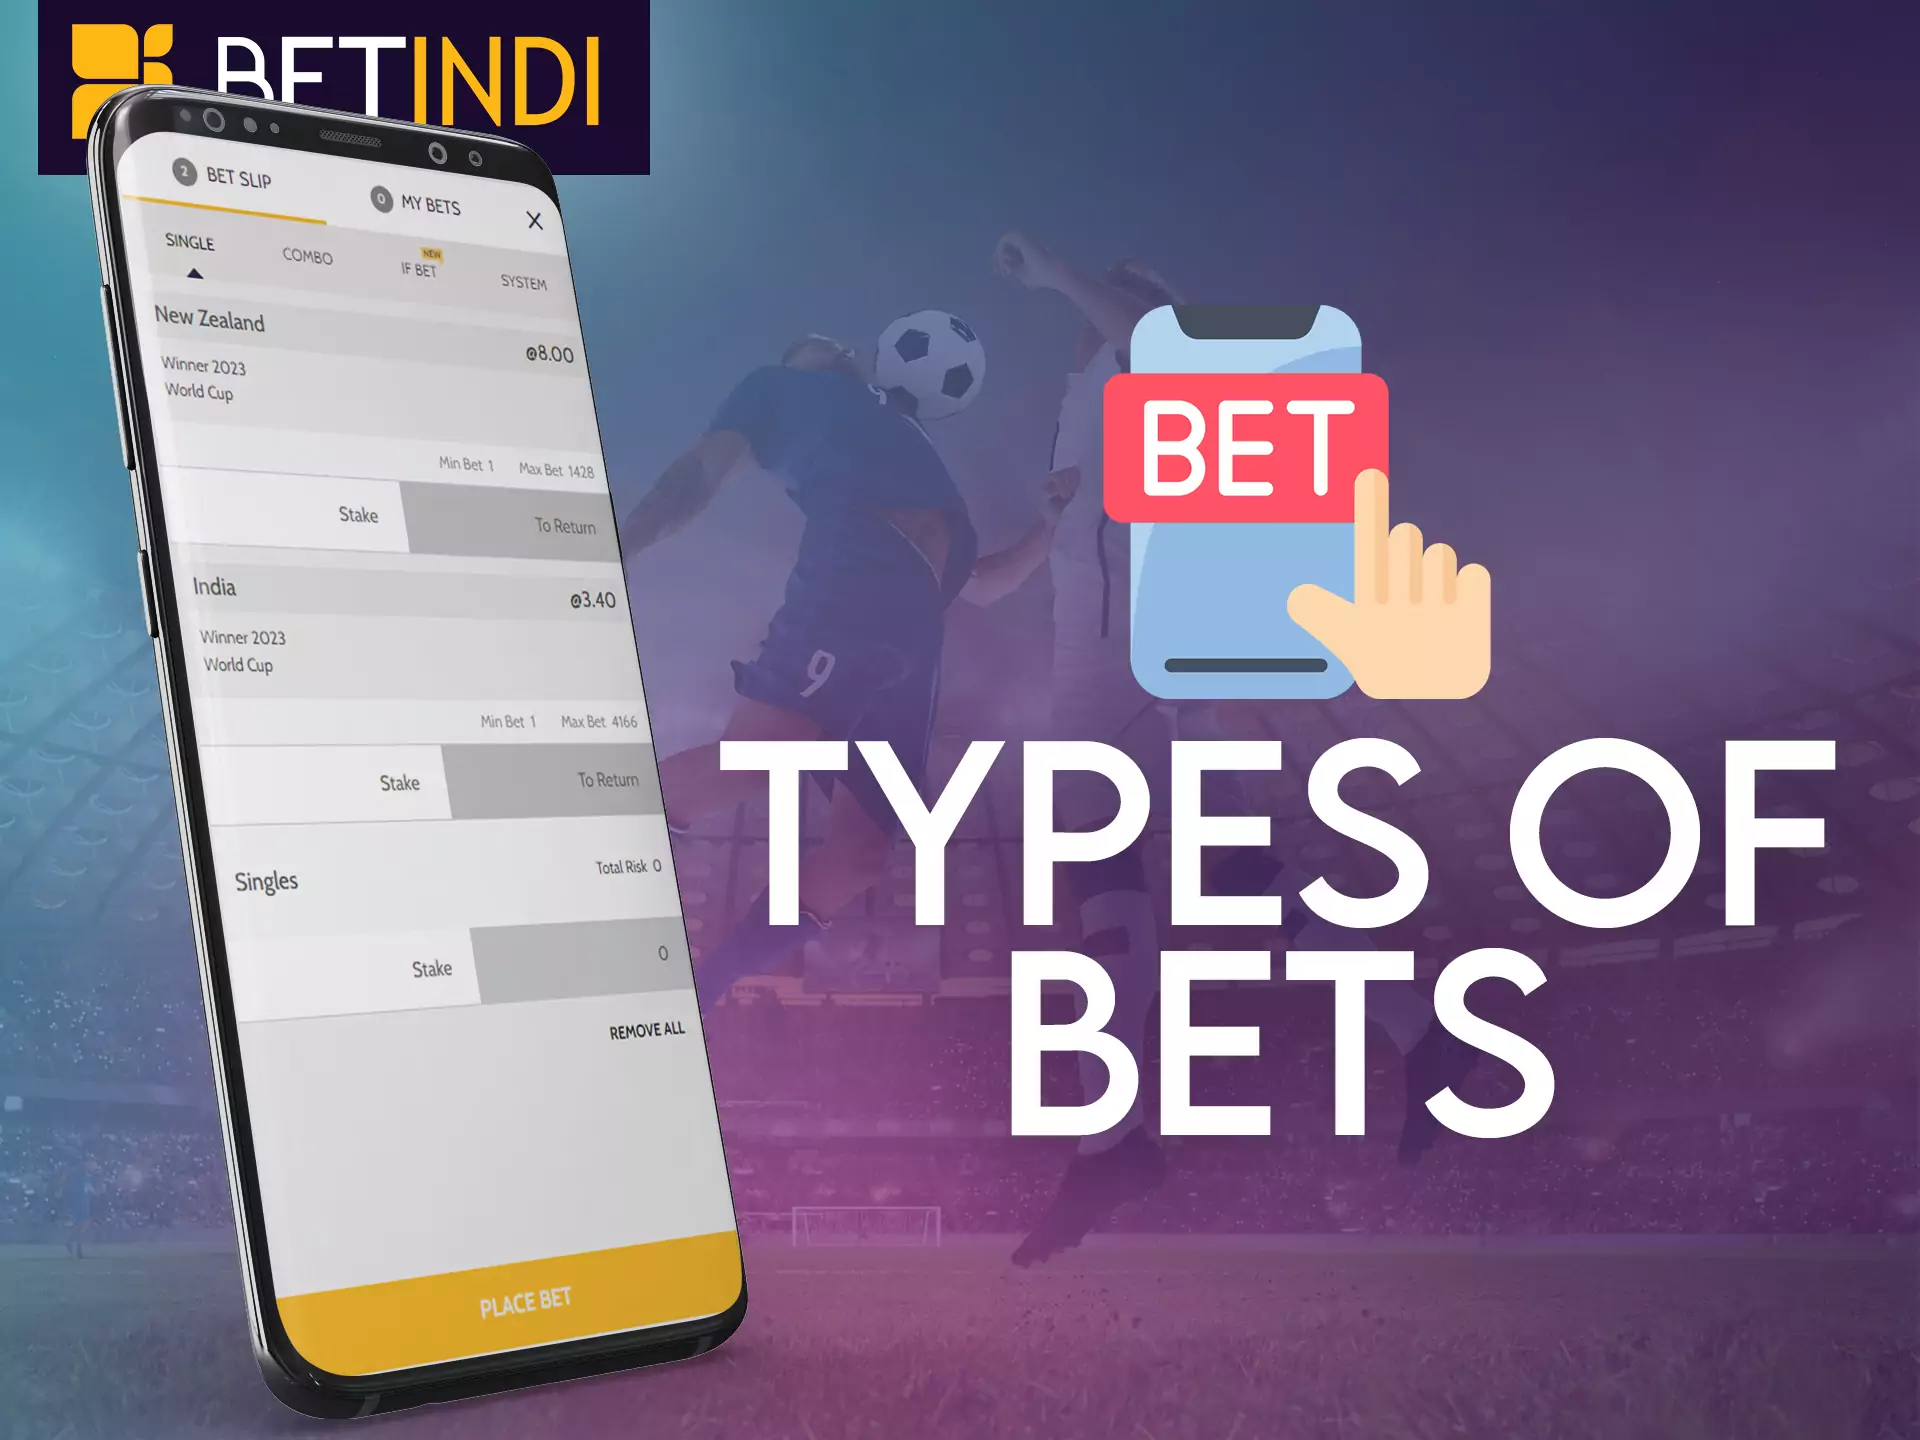 Find out all about the different types of bets on Betindi.